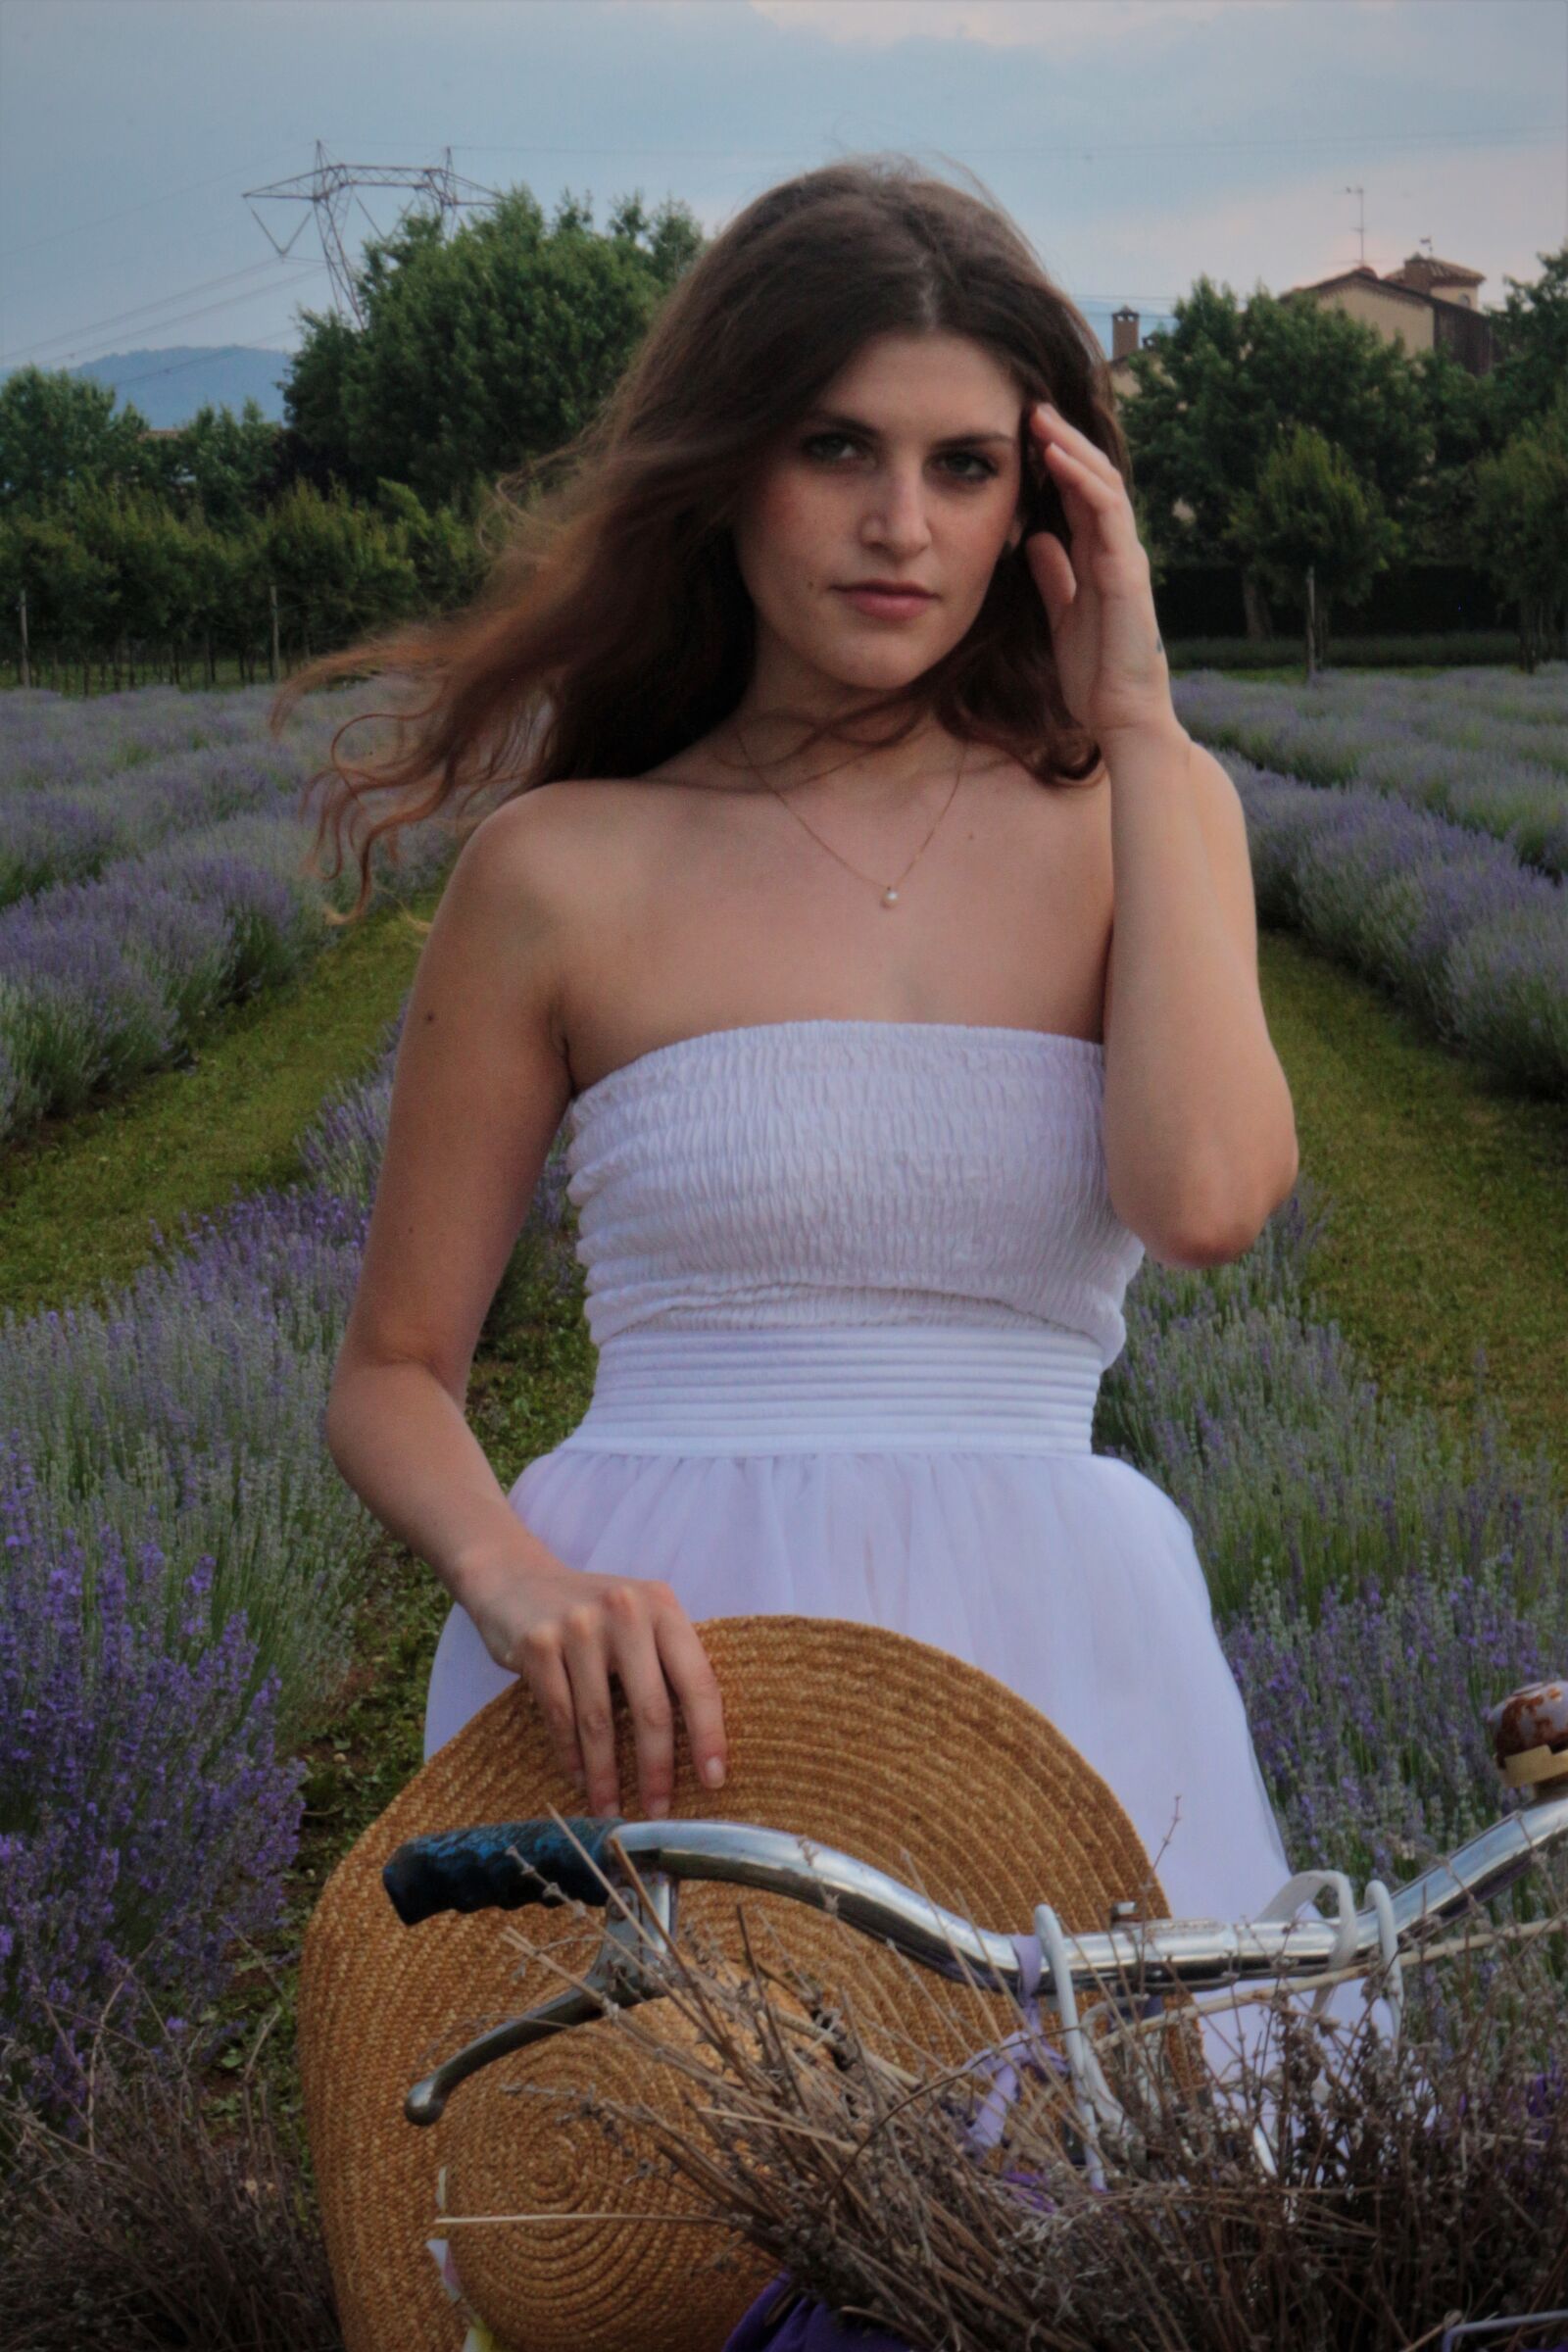 cycling among the lavender...